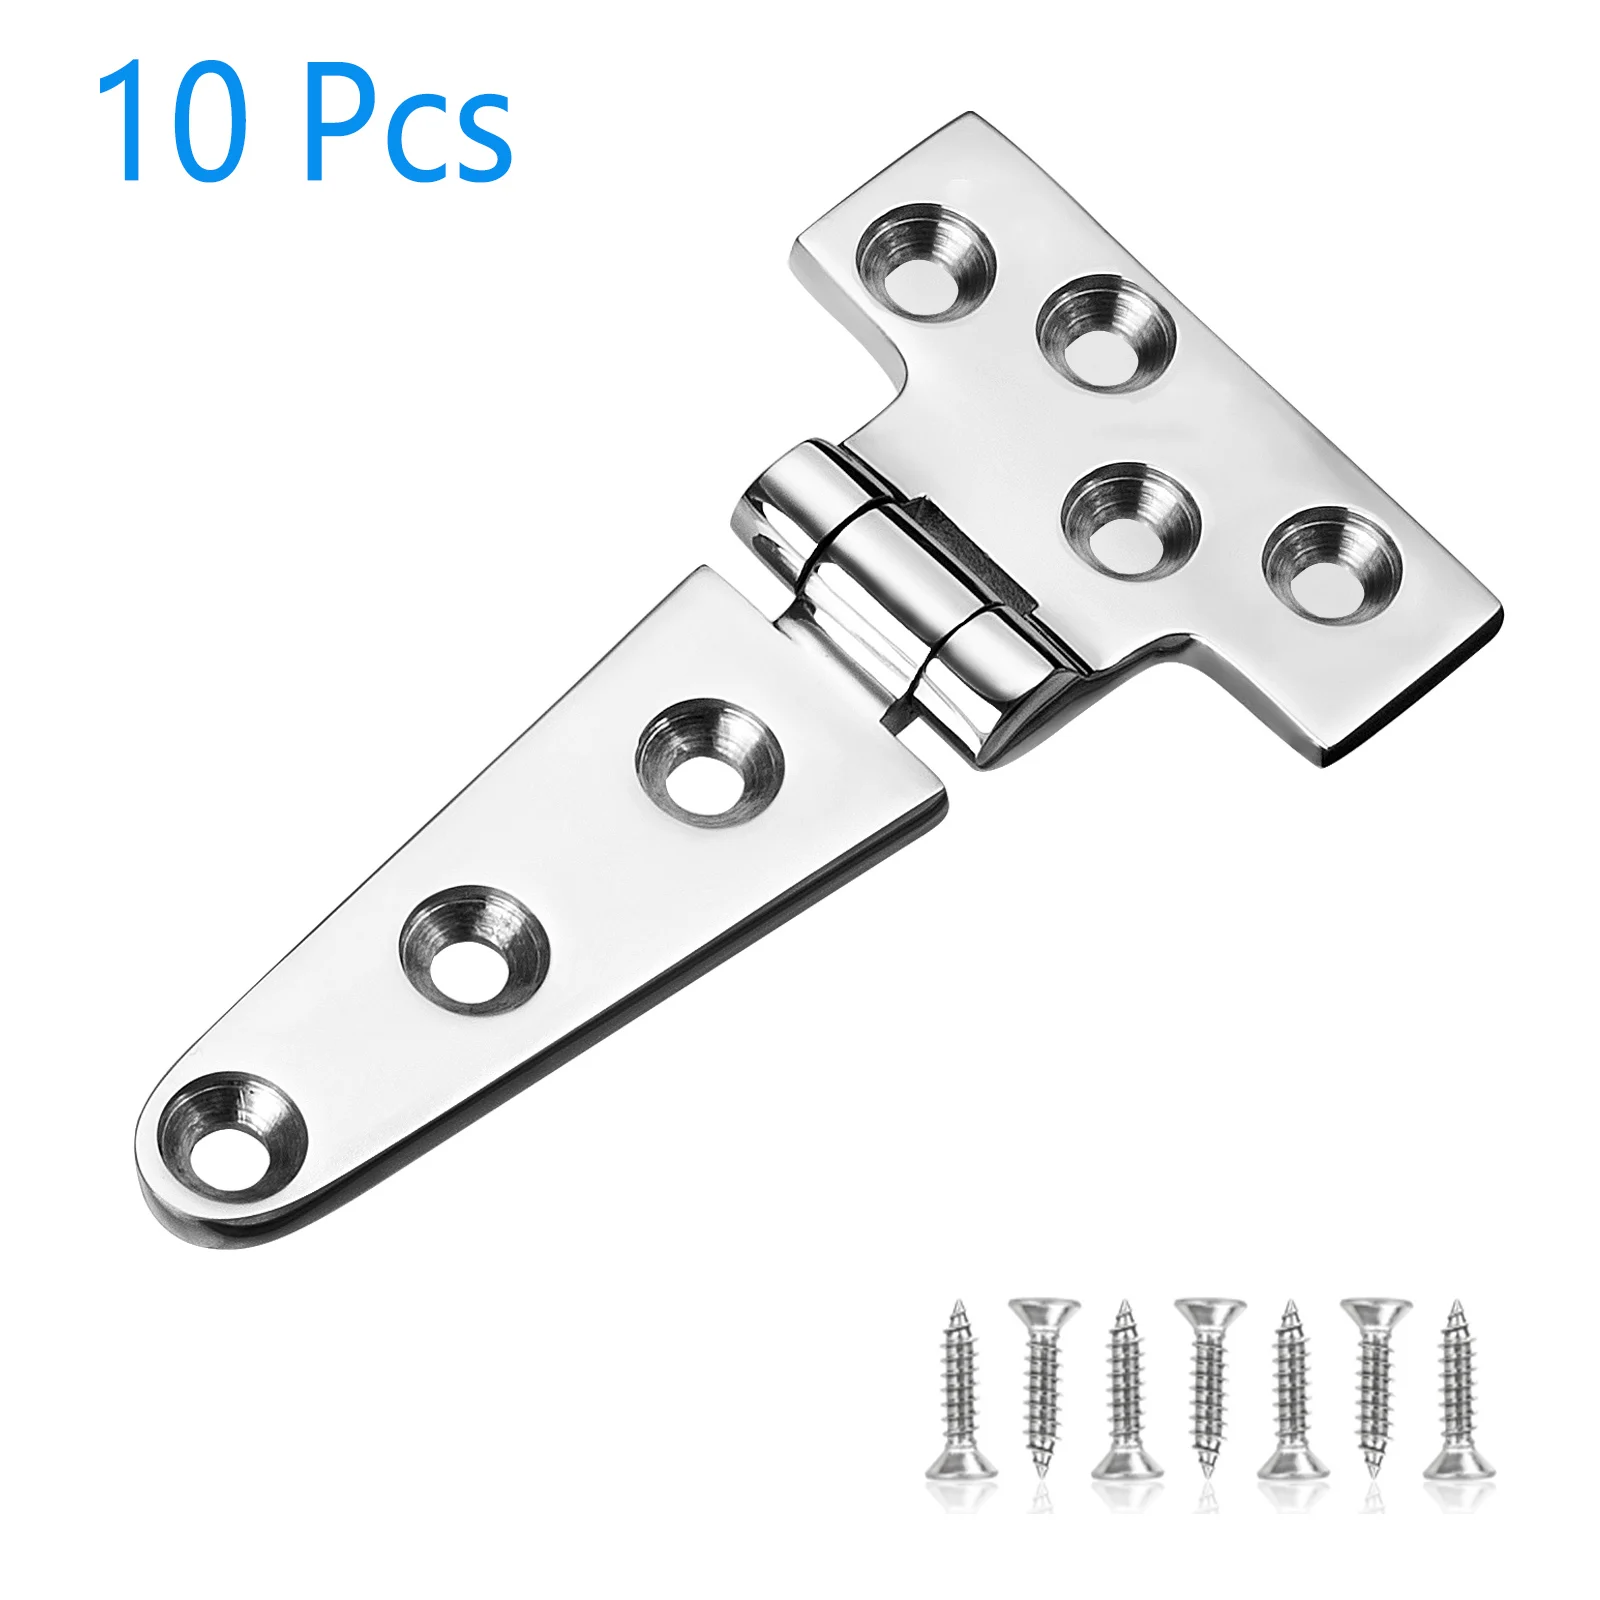 

Marine Grade Stainless Steel Boat Hinges,5.95 X 2.95 Inches, Heavy Duty 316 SS with Screws (10 PCS)